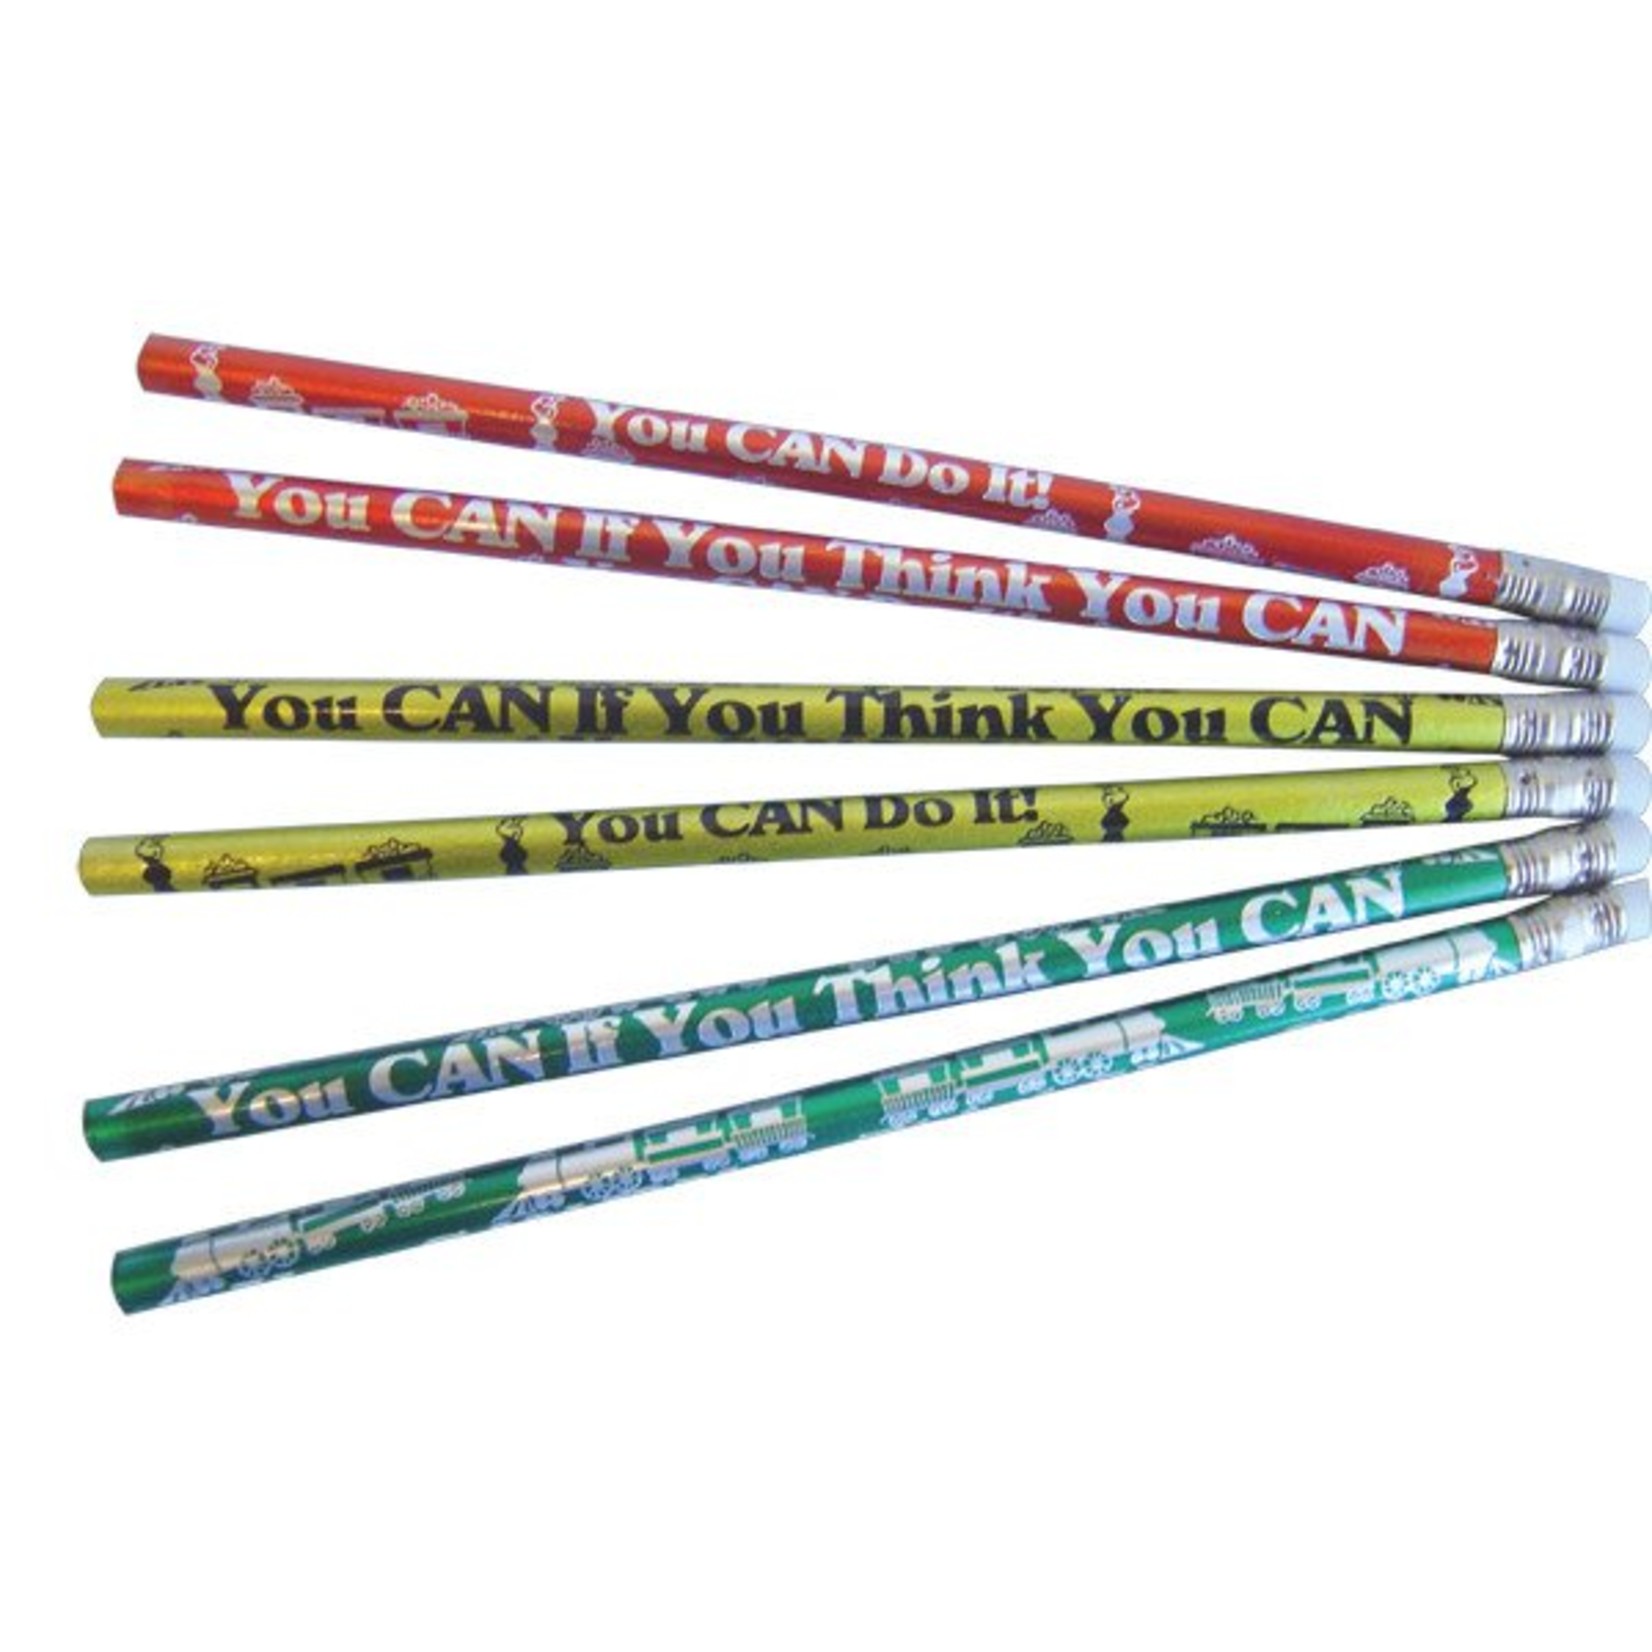 Charles Products I Think You Can Pencil